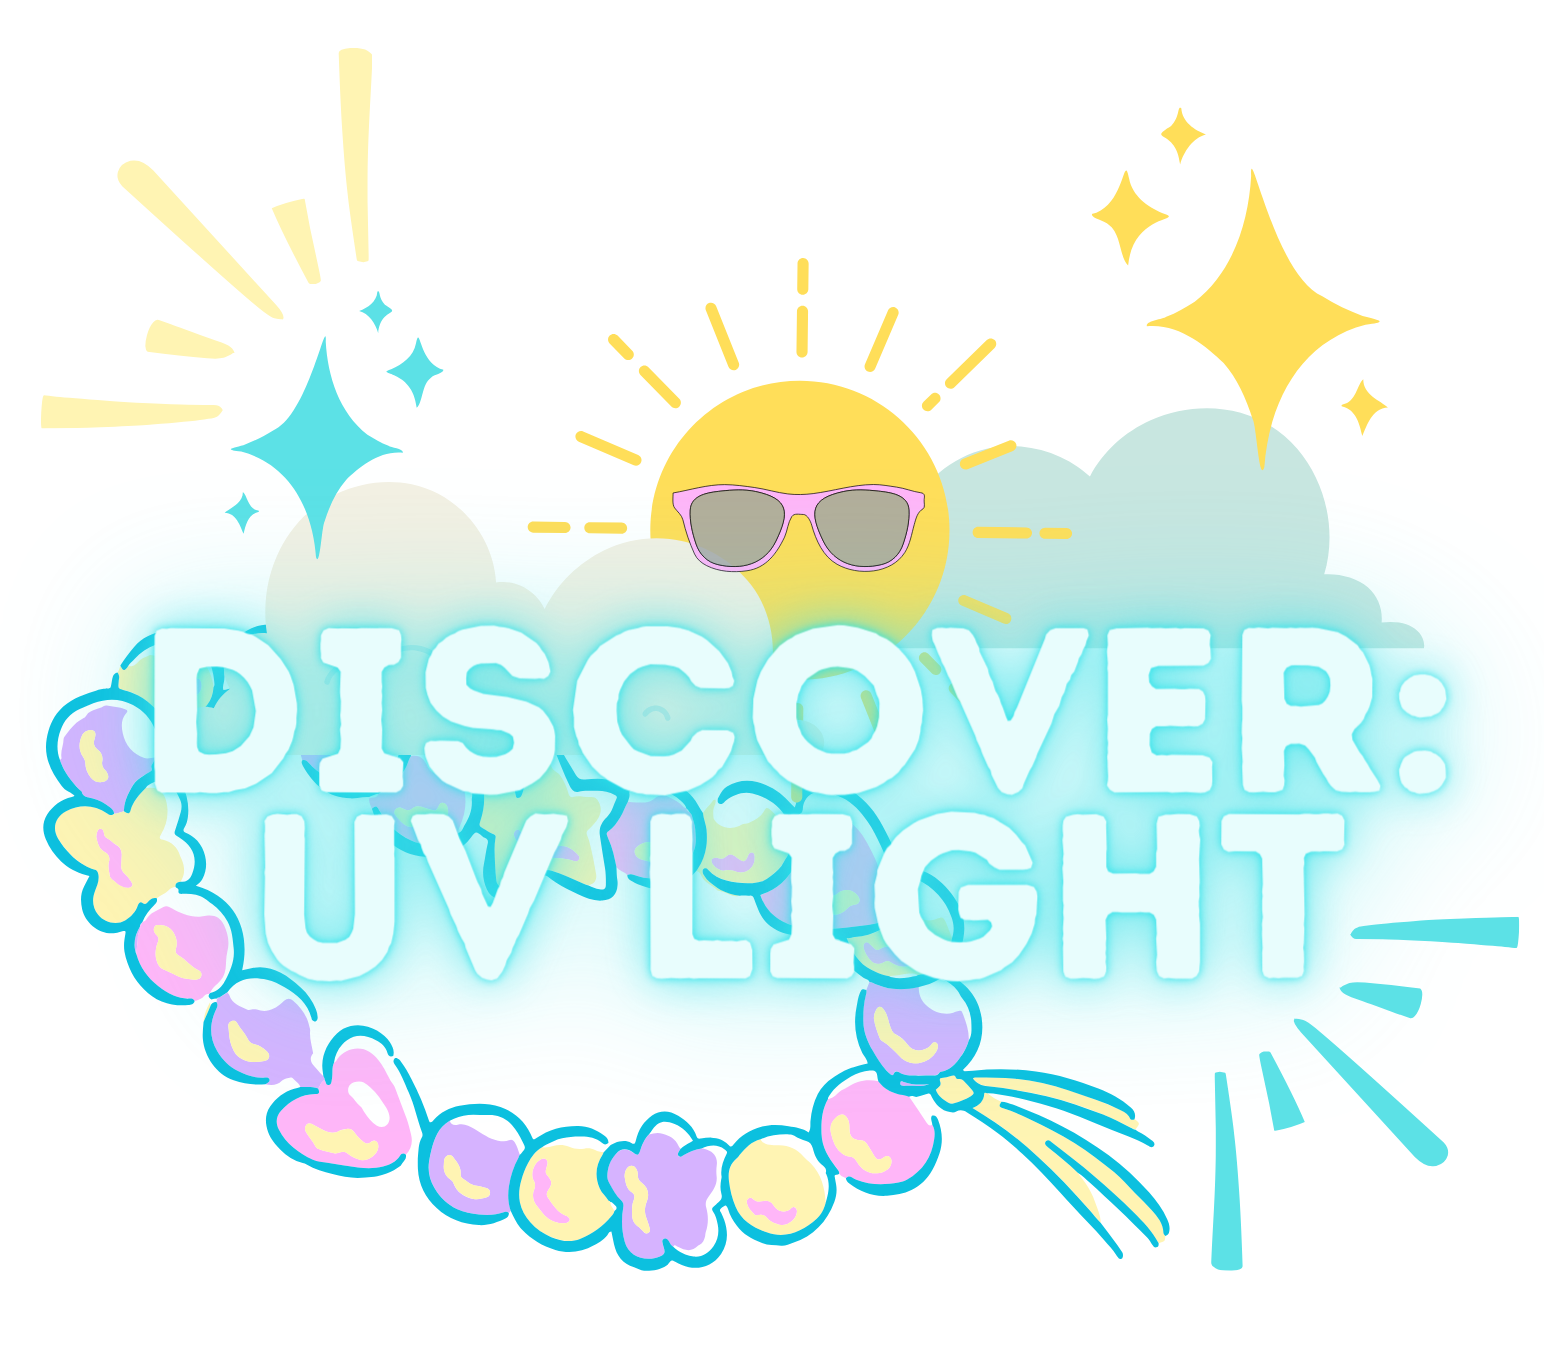 Large letters saying "Discover: UV Light!" surrounded by the sun, clouds, sparkles and a sparkly bracelet.